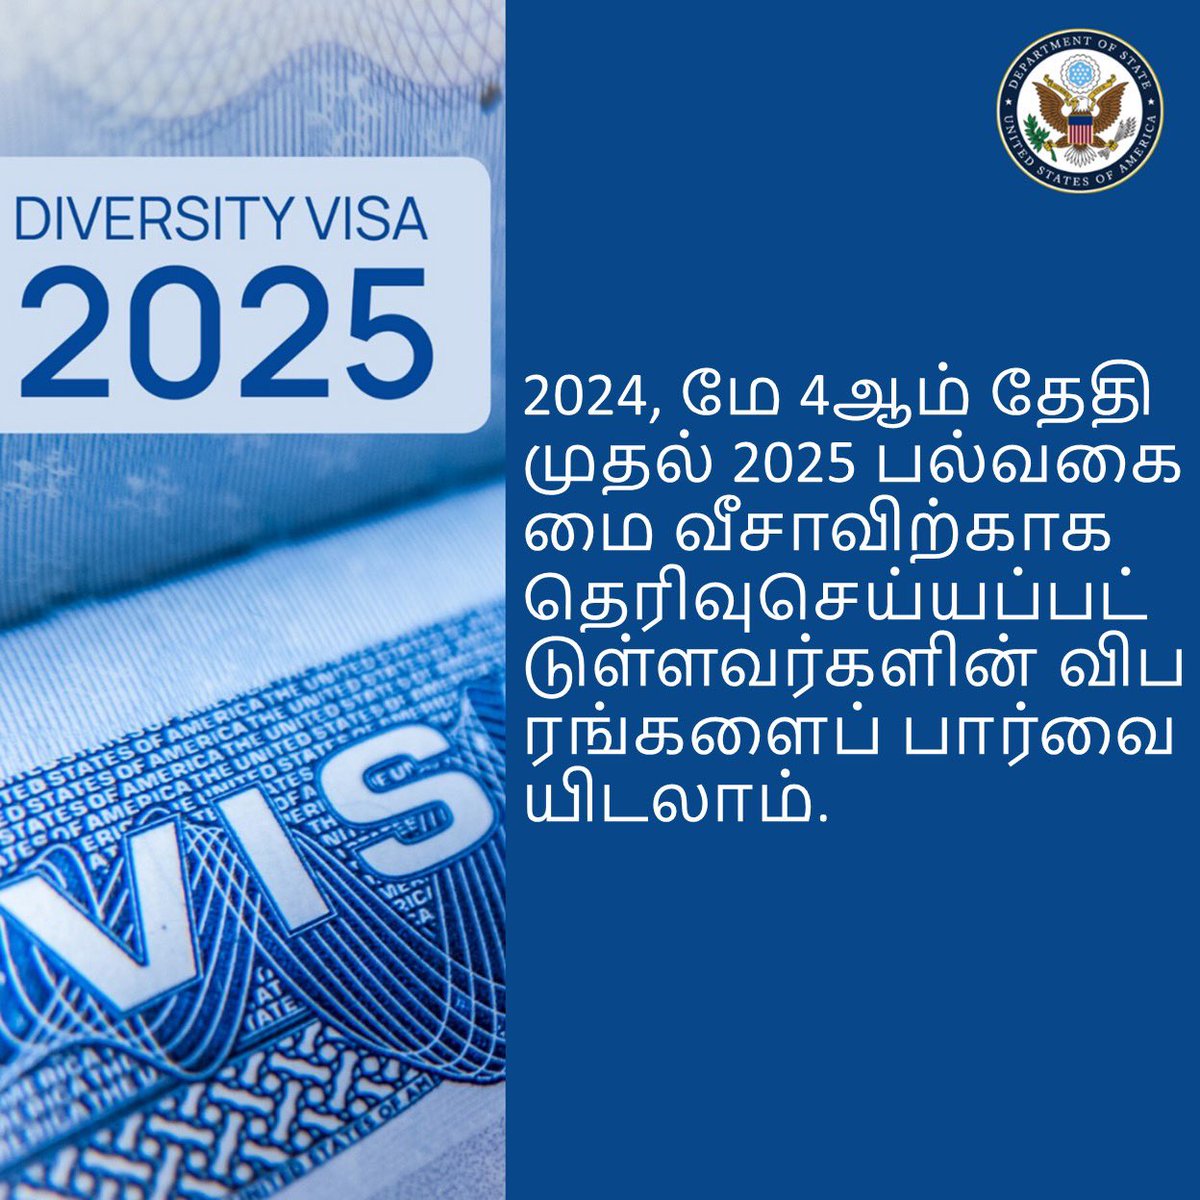 It’s almost time for Diversity Visa 2025 selections! Starting May 4, 2024, at 12 p.m. EDT, you will be able to check the status of your entry by entering your confirmation number at dvprogram.state.gov/ESC/. This is the ONLY way to check if you have been selected to participate.